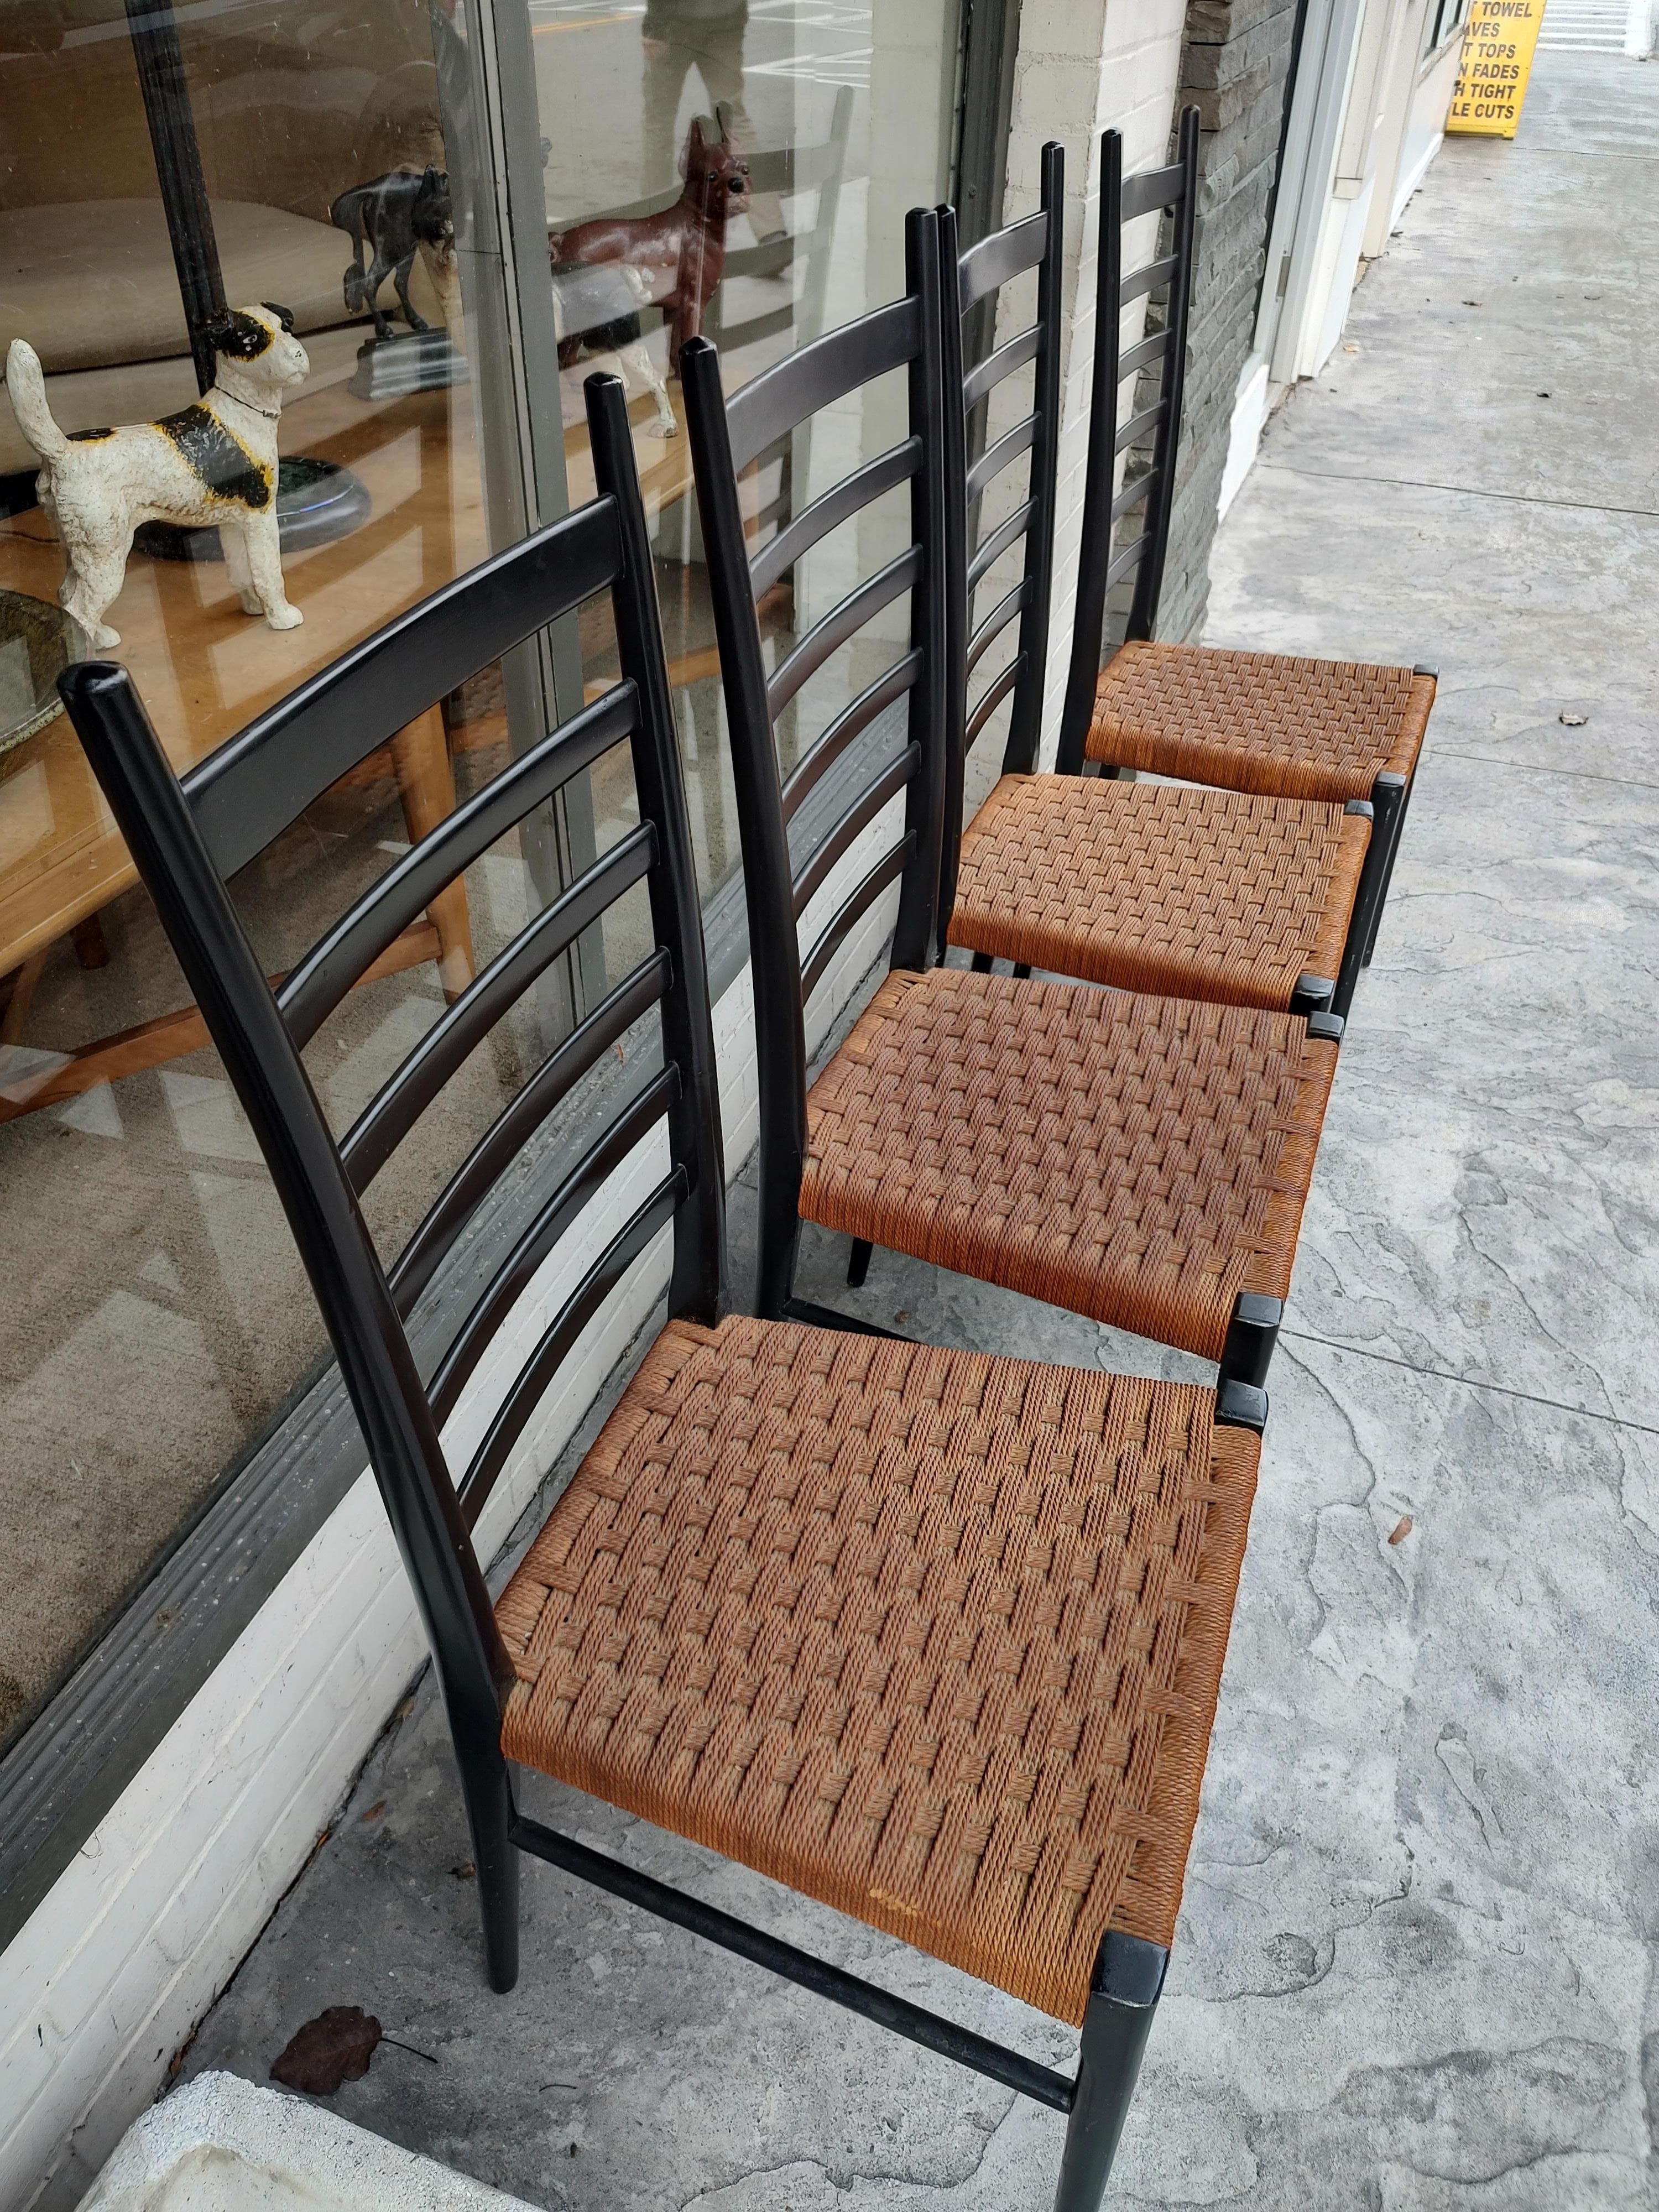 Fabulous set of 4 tall ladder back chairs with woven rope seats. Original in every sense and in excellent vintage condition with minimal wear. Chairs were in dry storage for a large number of years and have aged well. Very tight and little nicks but